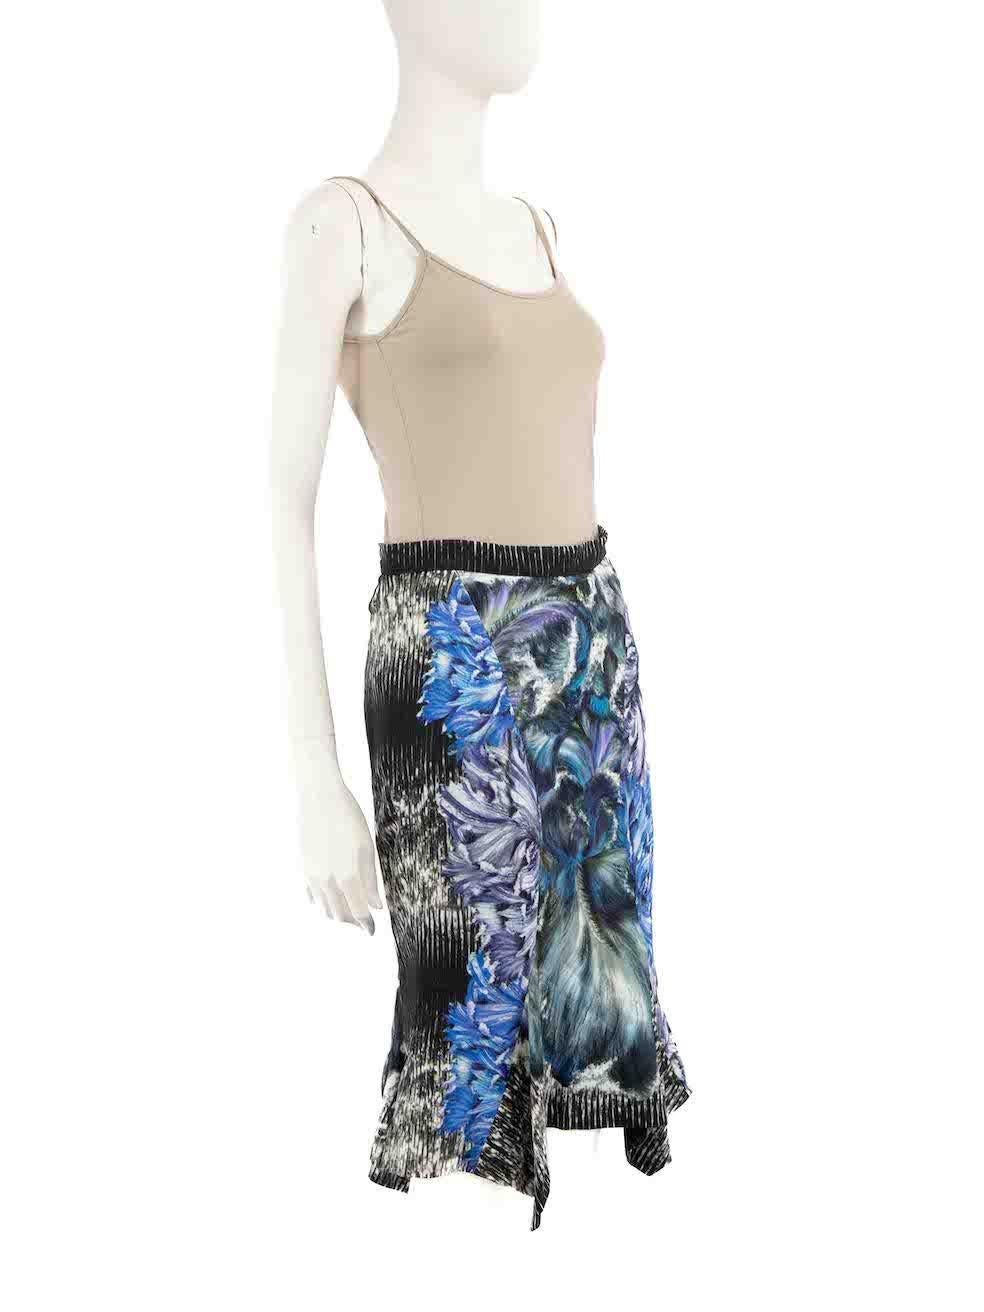 Condition
 
 CONDITION is Very good. Hardly any visible wear to skirt is evident on this used Peter Pilotto designer resale item.
 
 Details
 
 
 
 Multicolour- blue, black, grey
 
 Viscose
 
 Skirt
 
 Knee length
 
 Flared hem
 
 Figure hugging